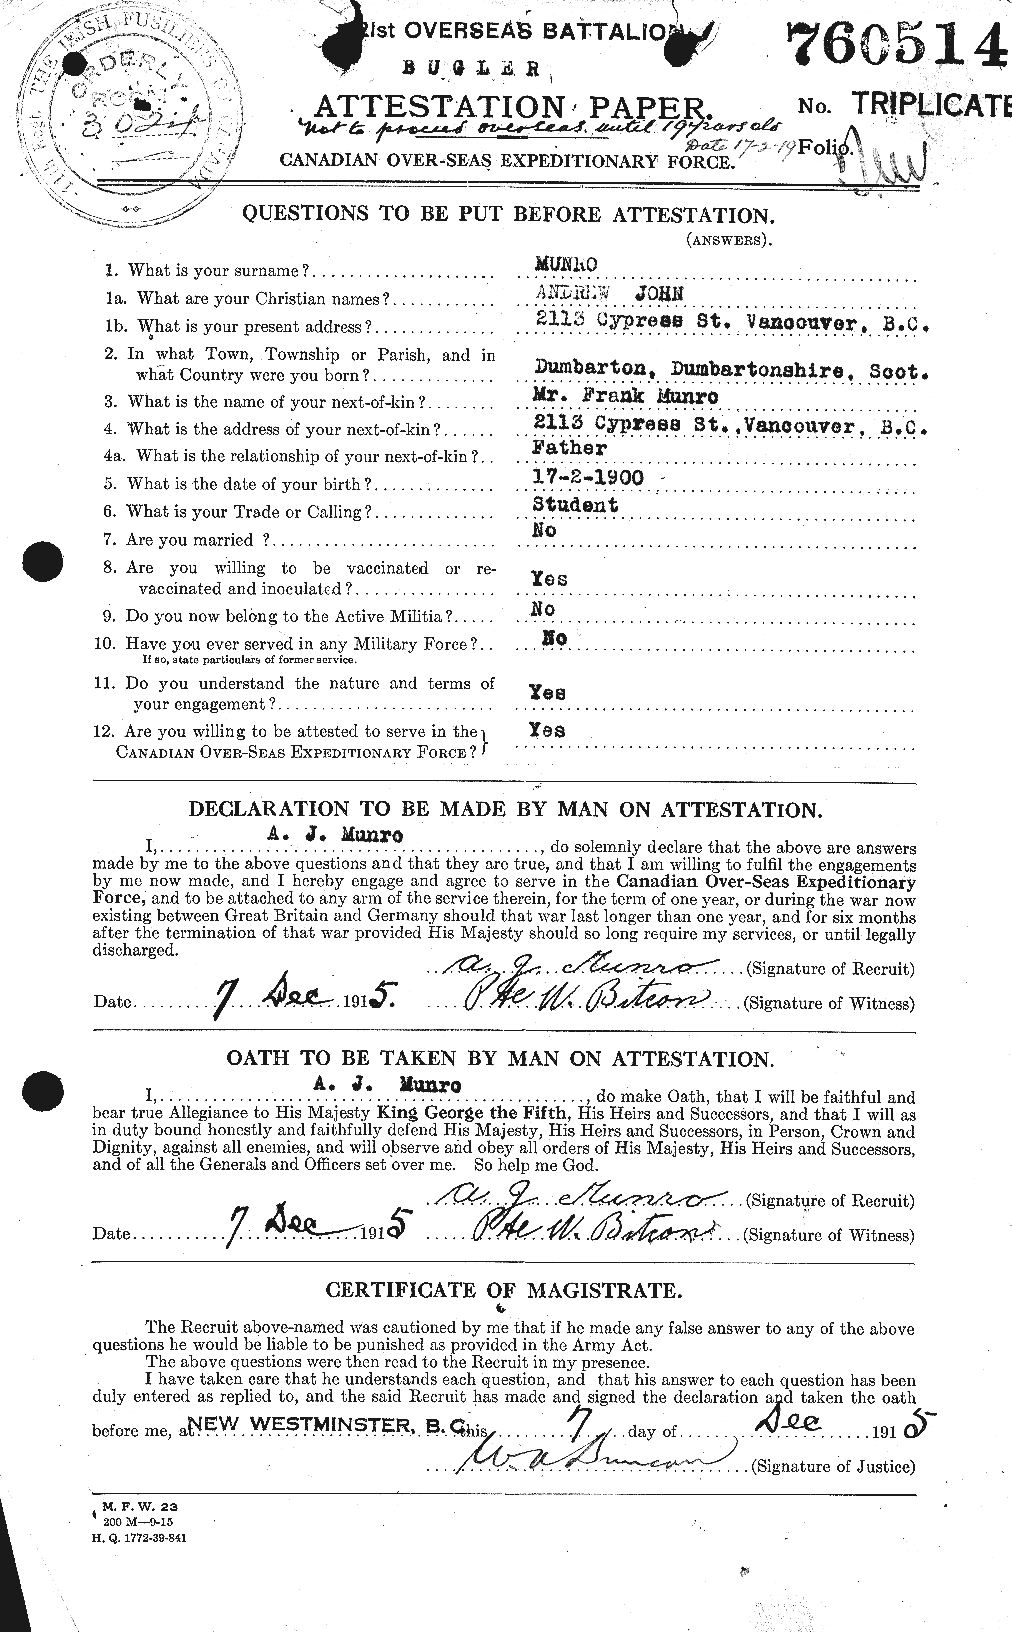 Personnel Records of the First World War - CEF 513749a